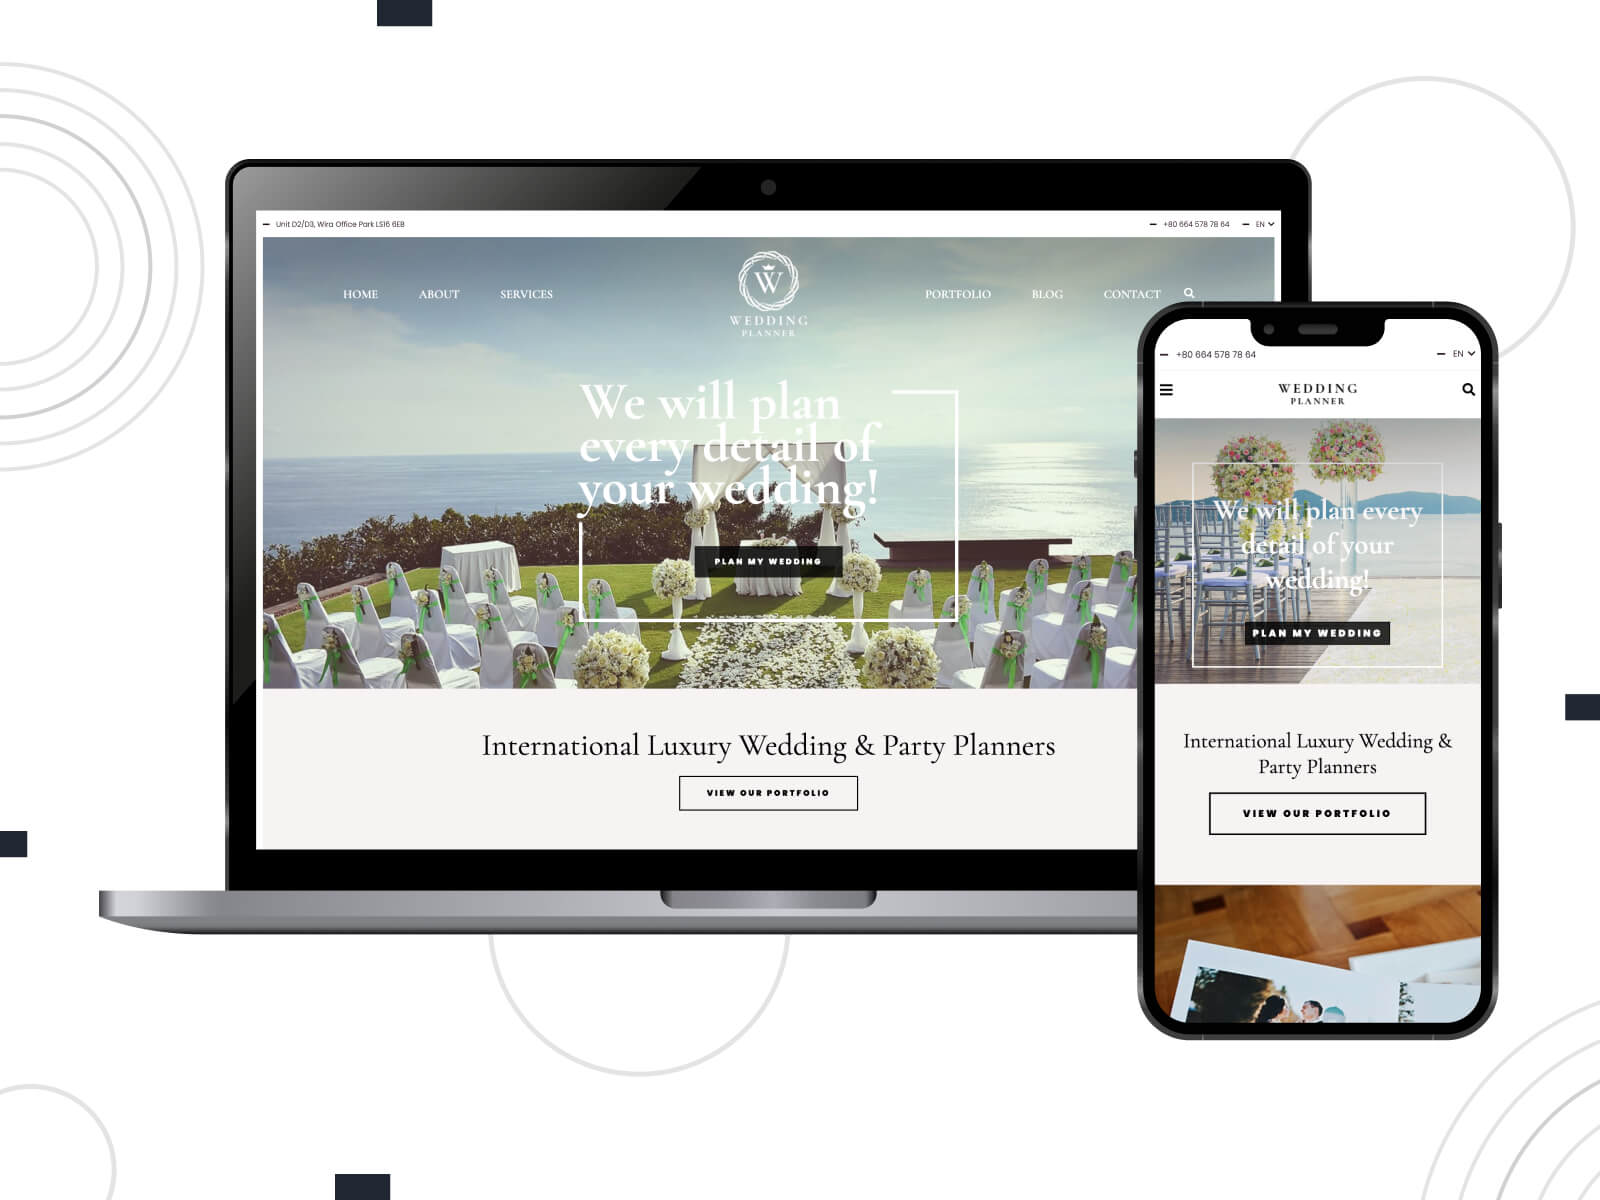 Picture of Wedding Planner - bright, crisp, comprehensive WordPress wedding templates with checklists and countdown features in dark sea green, olive drab, and dark olive green color gradation.